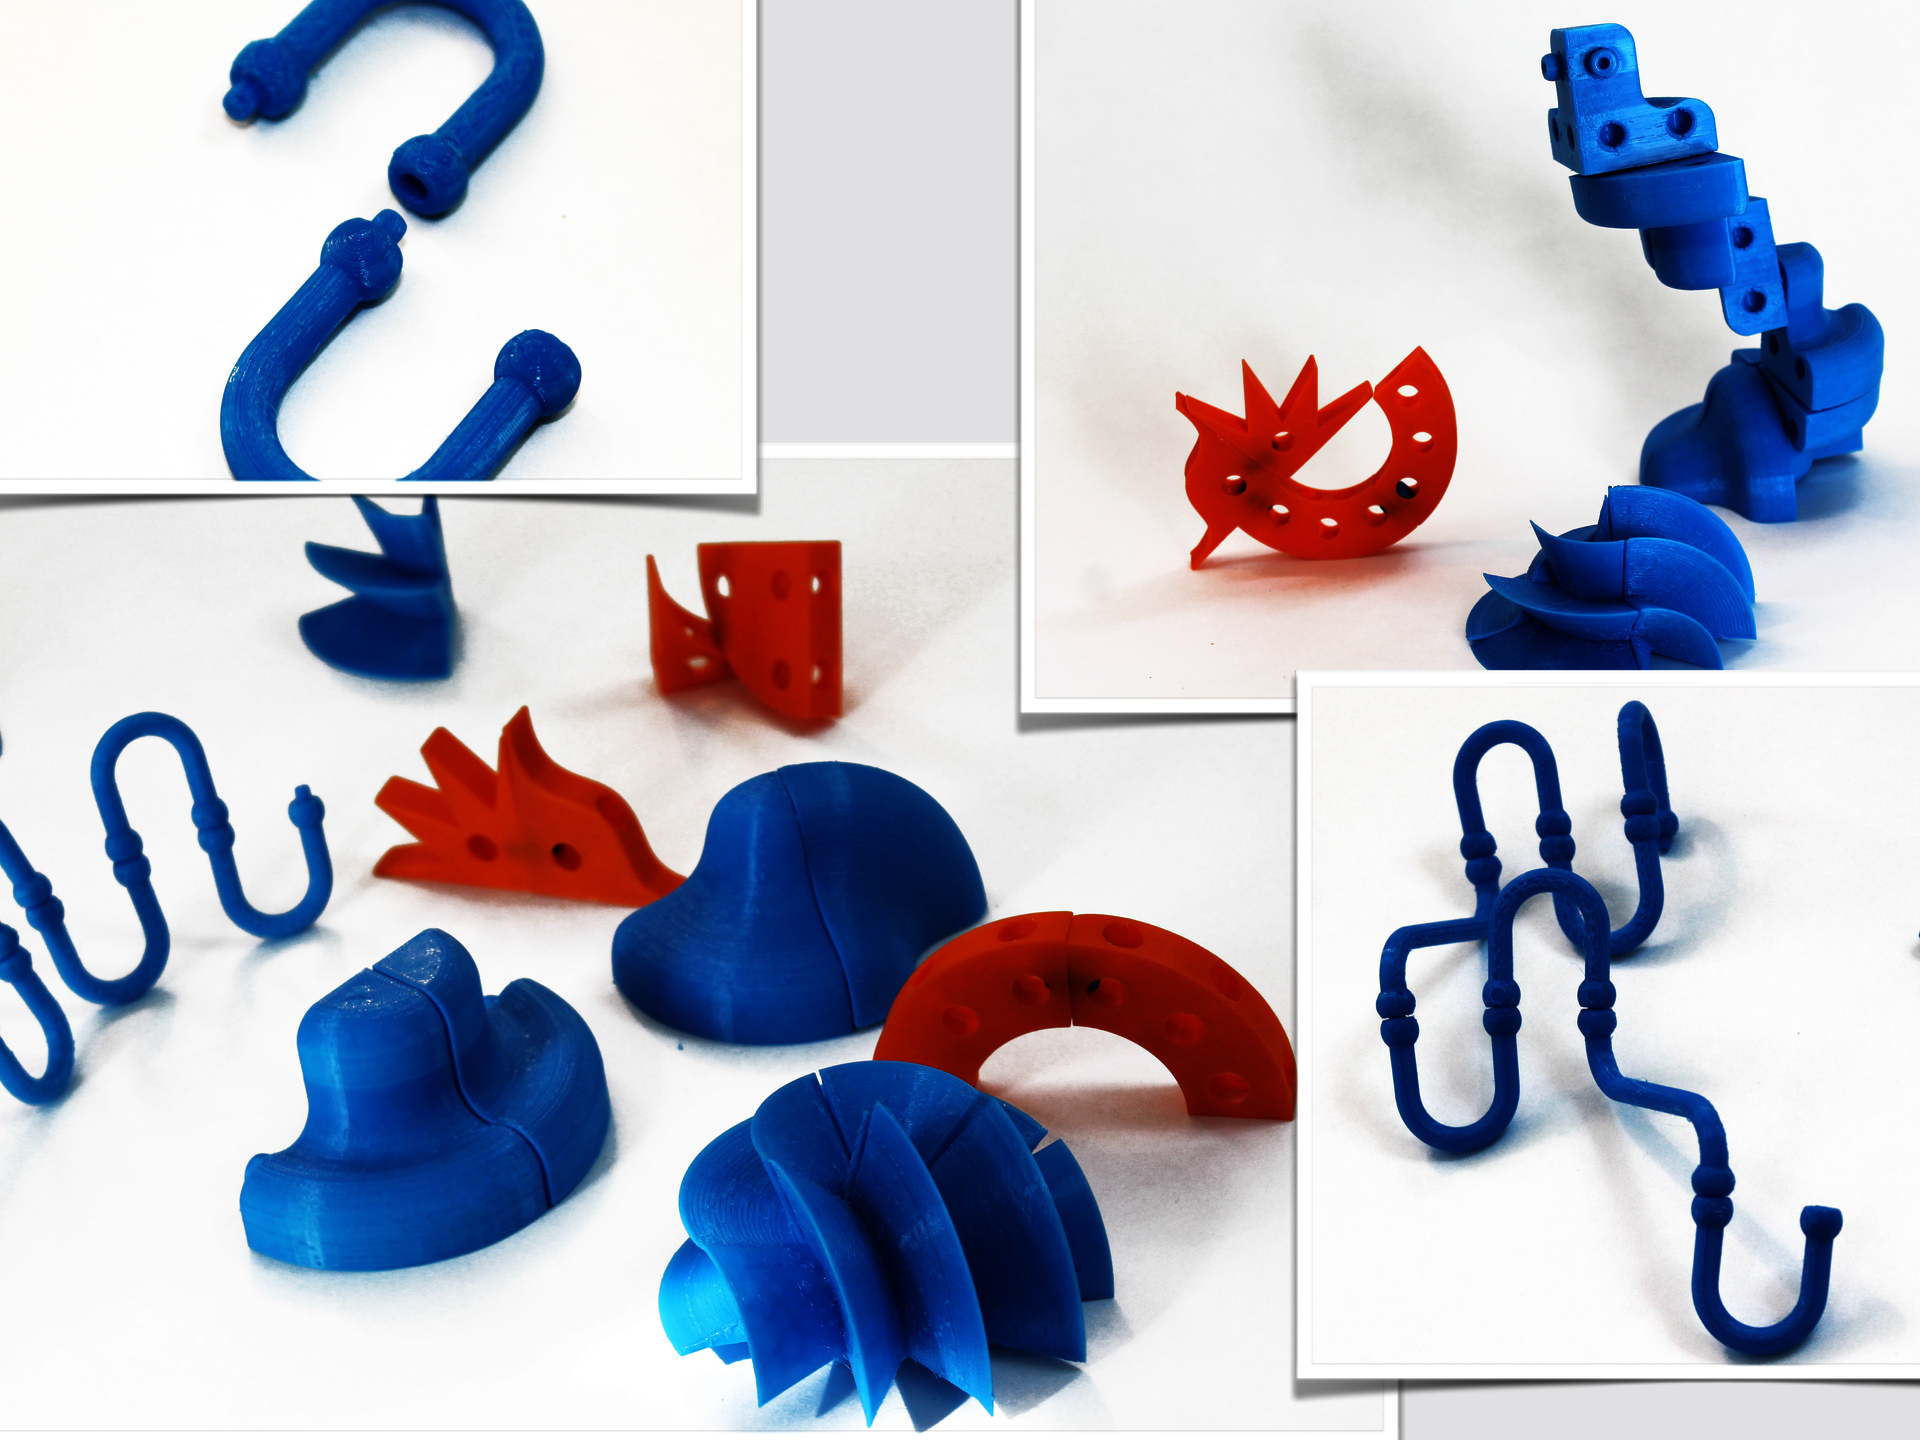 StormForms is a modular long-form play system to be used in a classroom or group setting